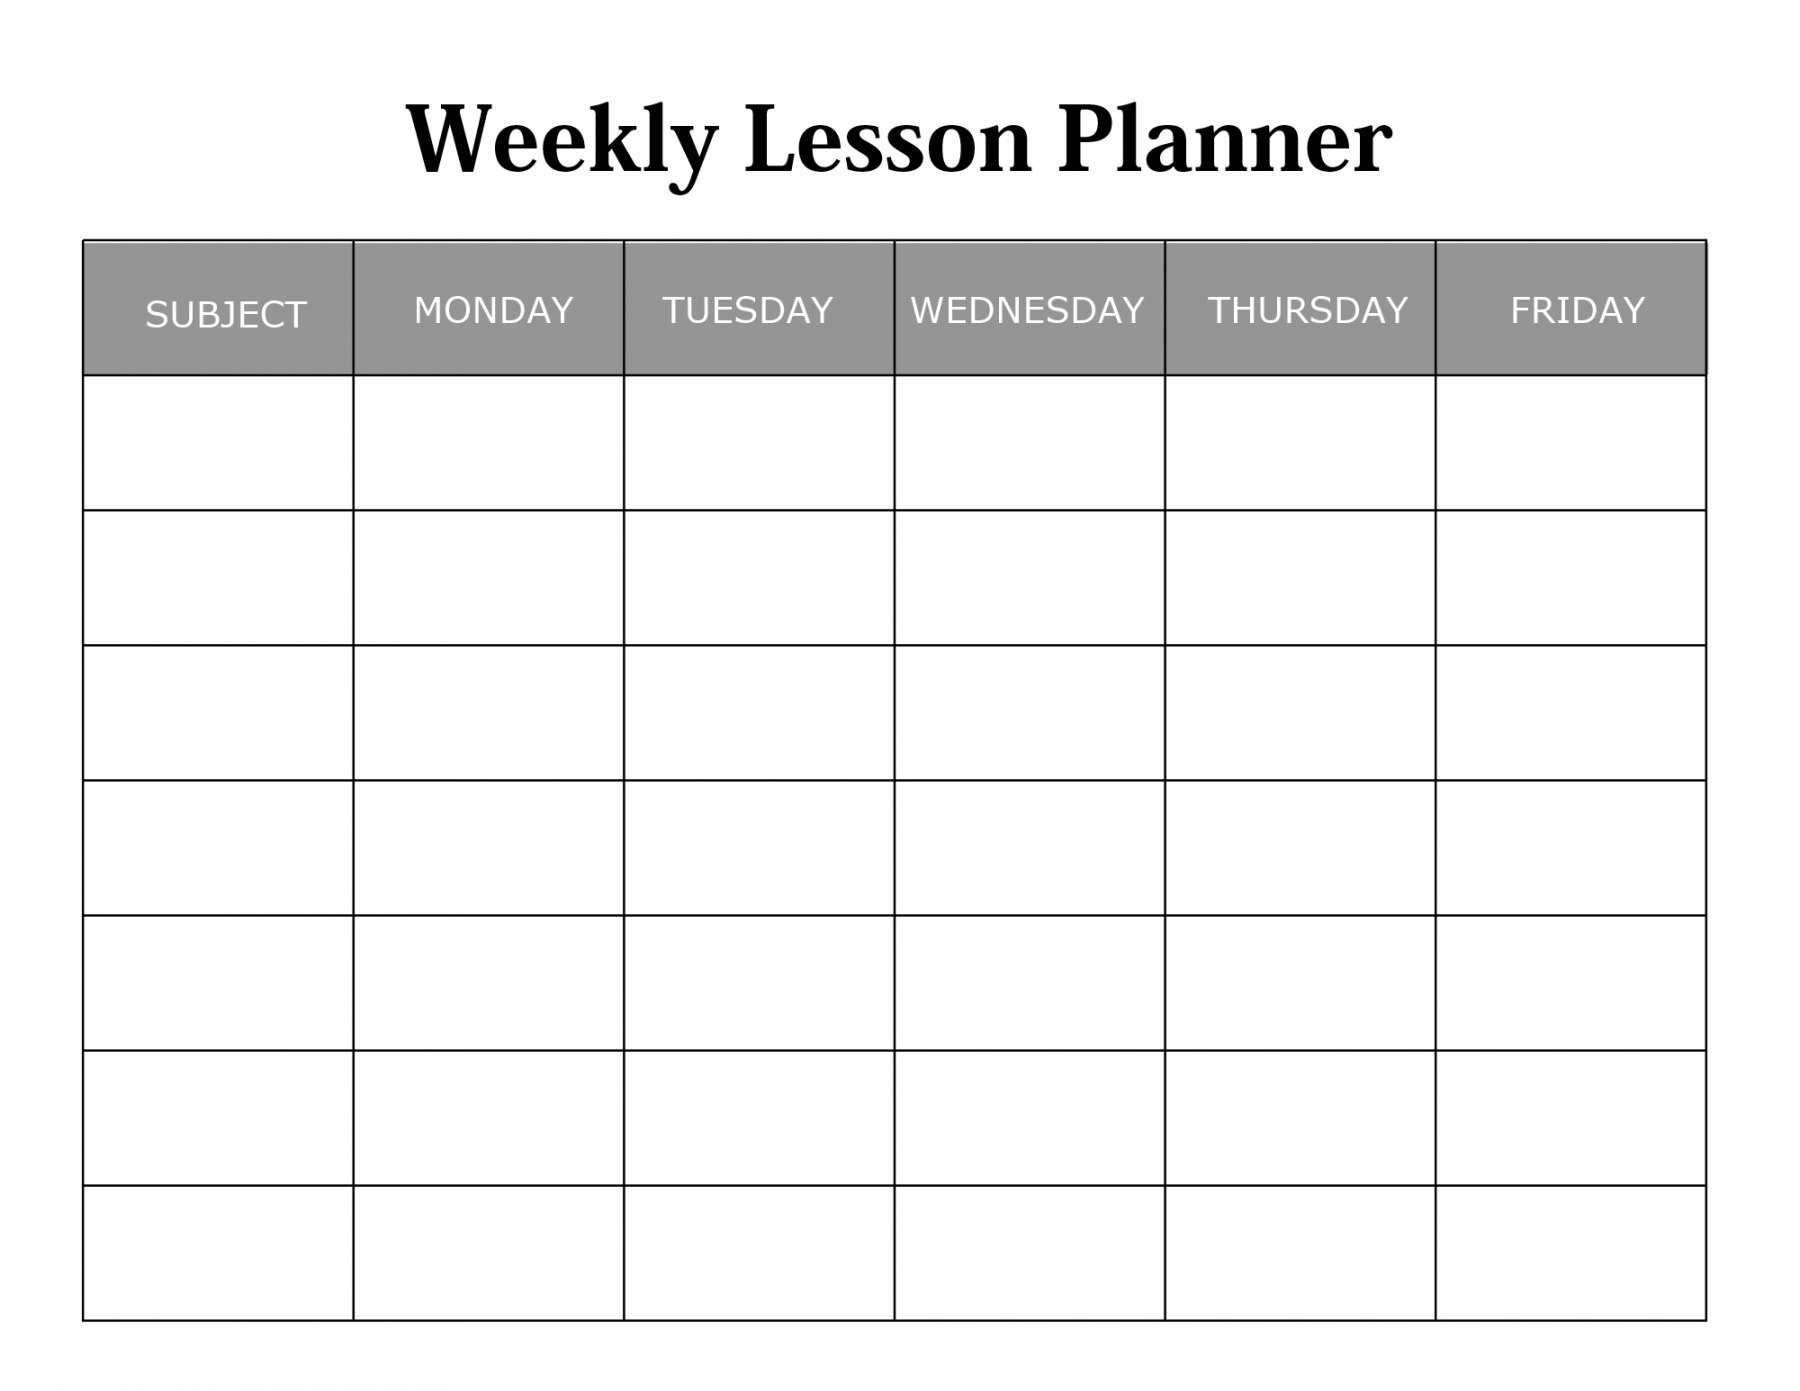 Weekly Lesson Plan Templates:  Best Lesson Planners, Free Download! - FREE Printables - Printable Free Weekly Lesson Plan Template